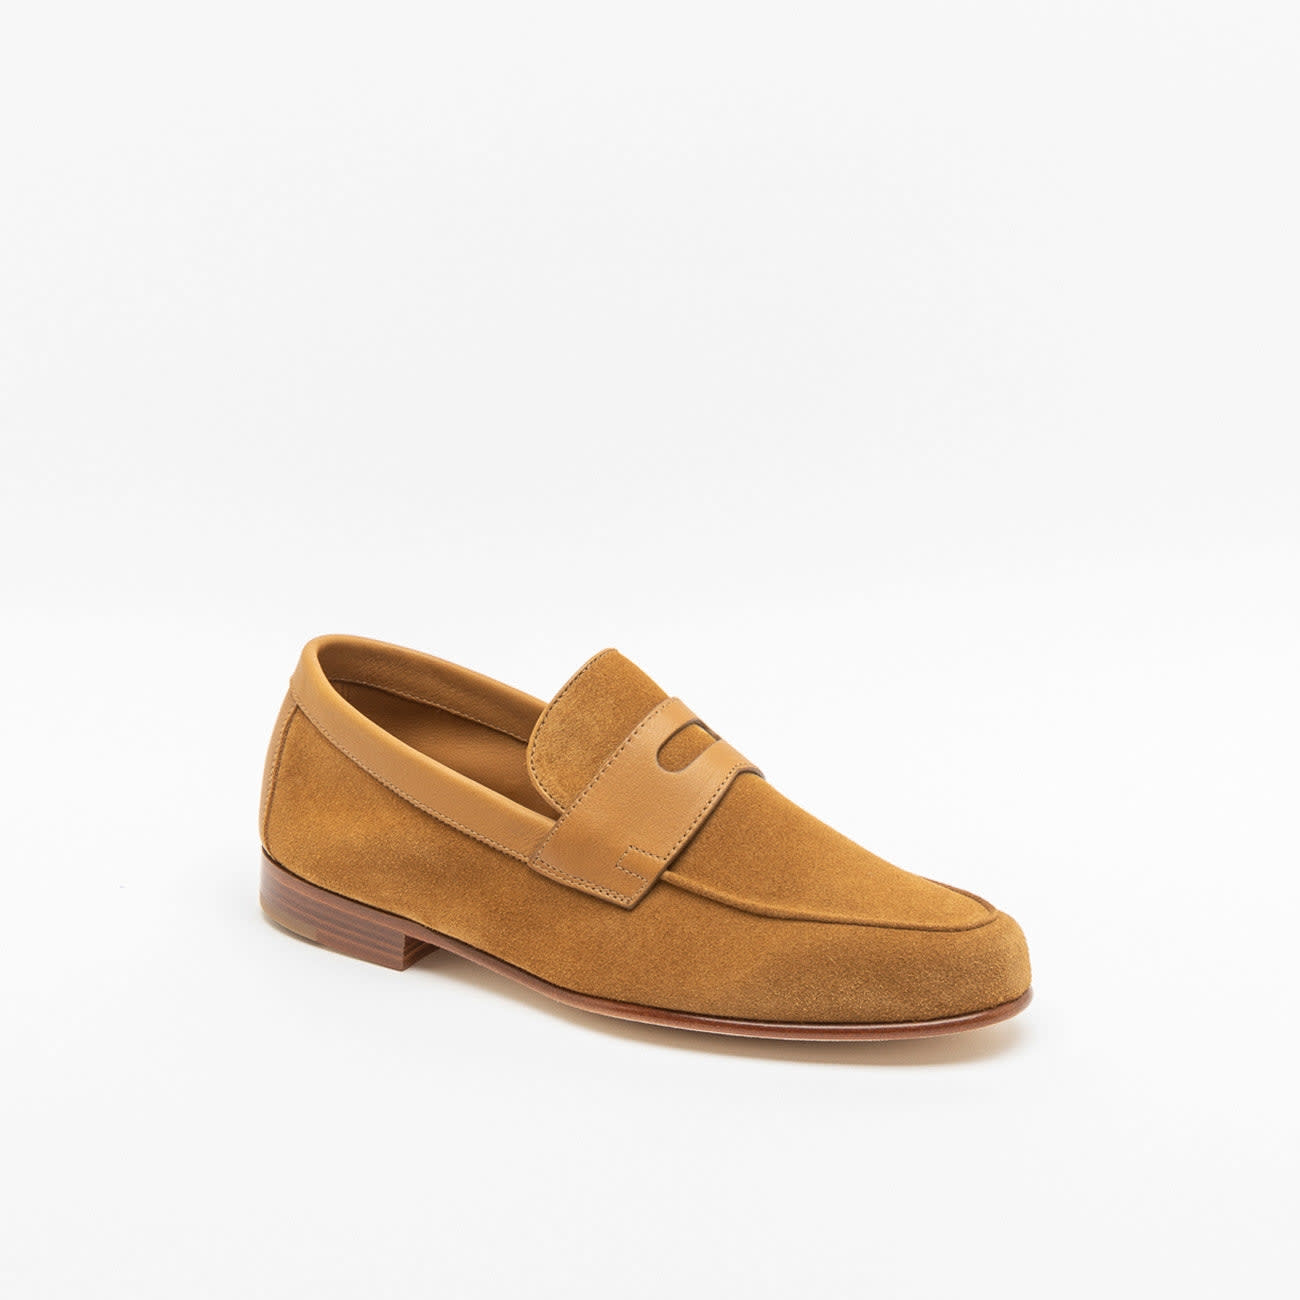 Hendra Cognac Suede Penny Loafer